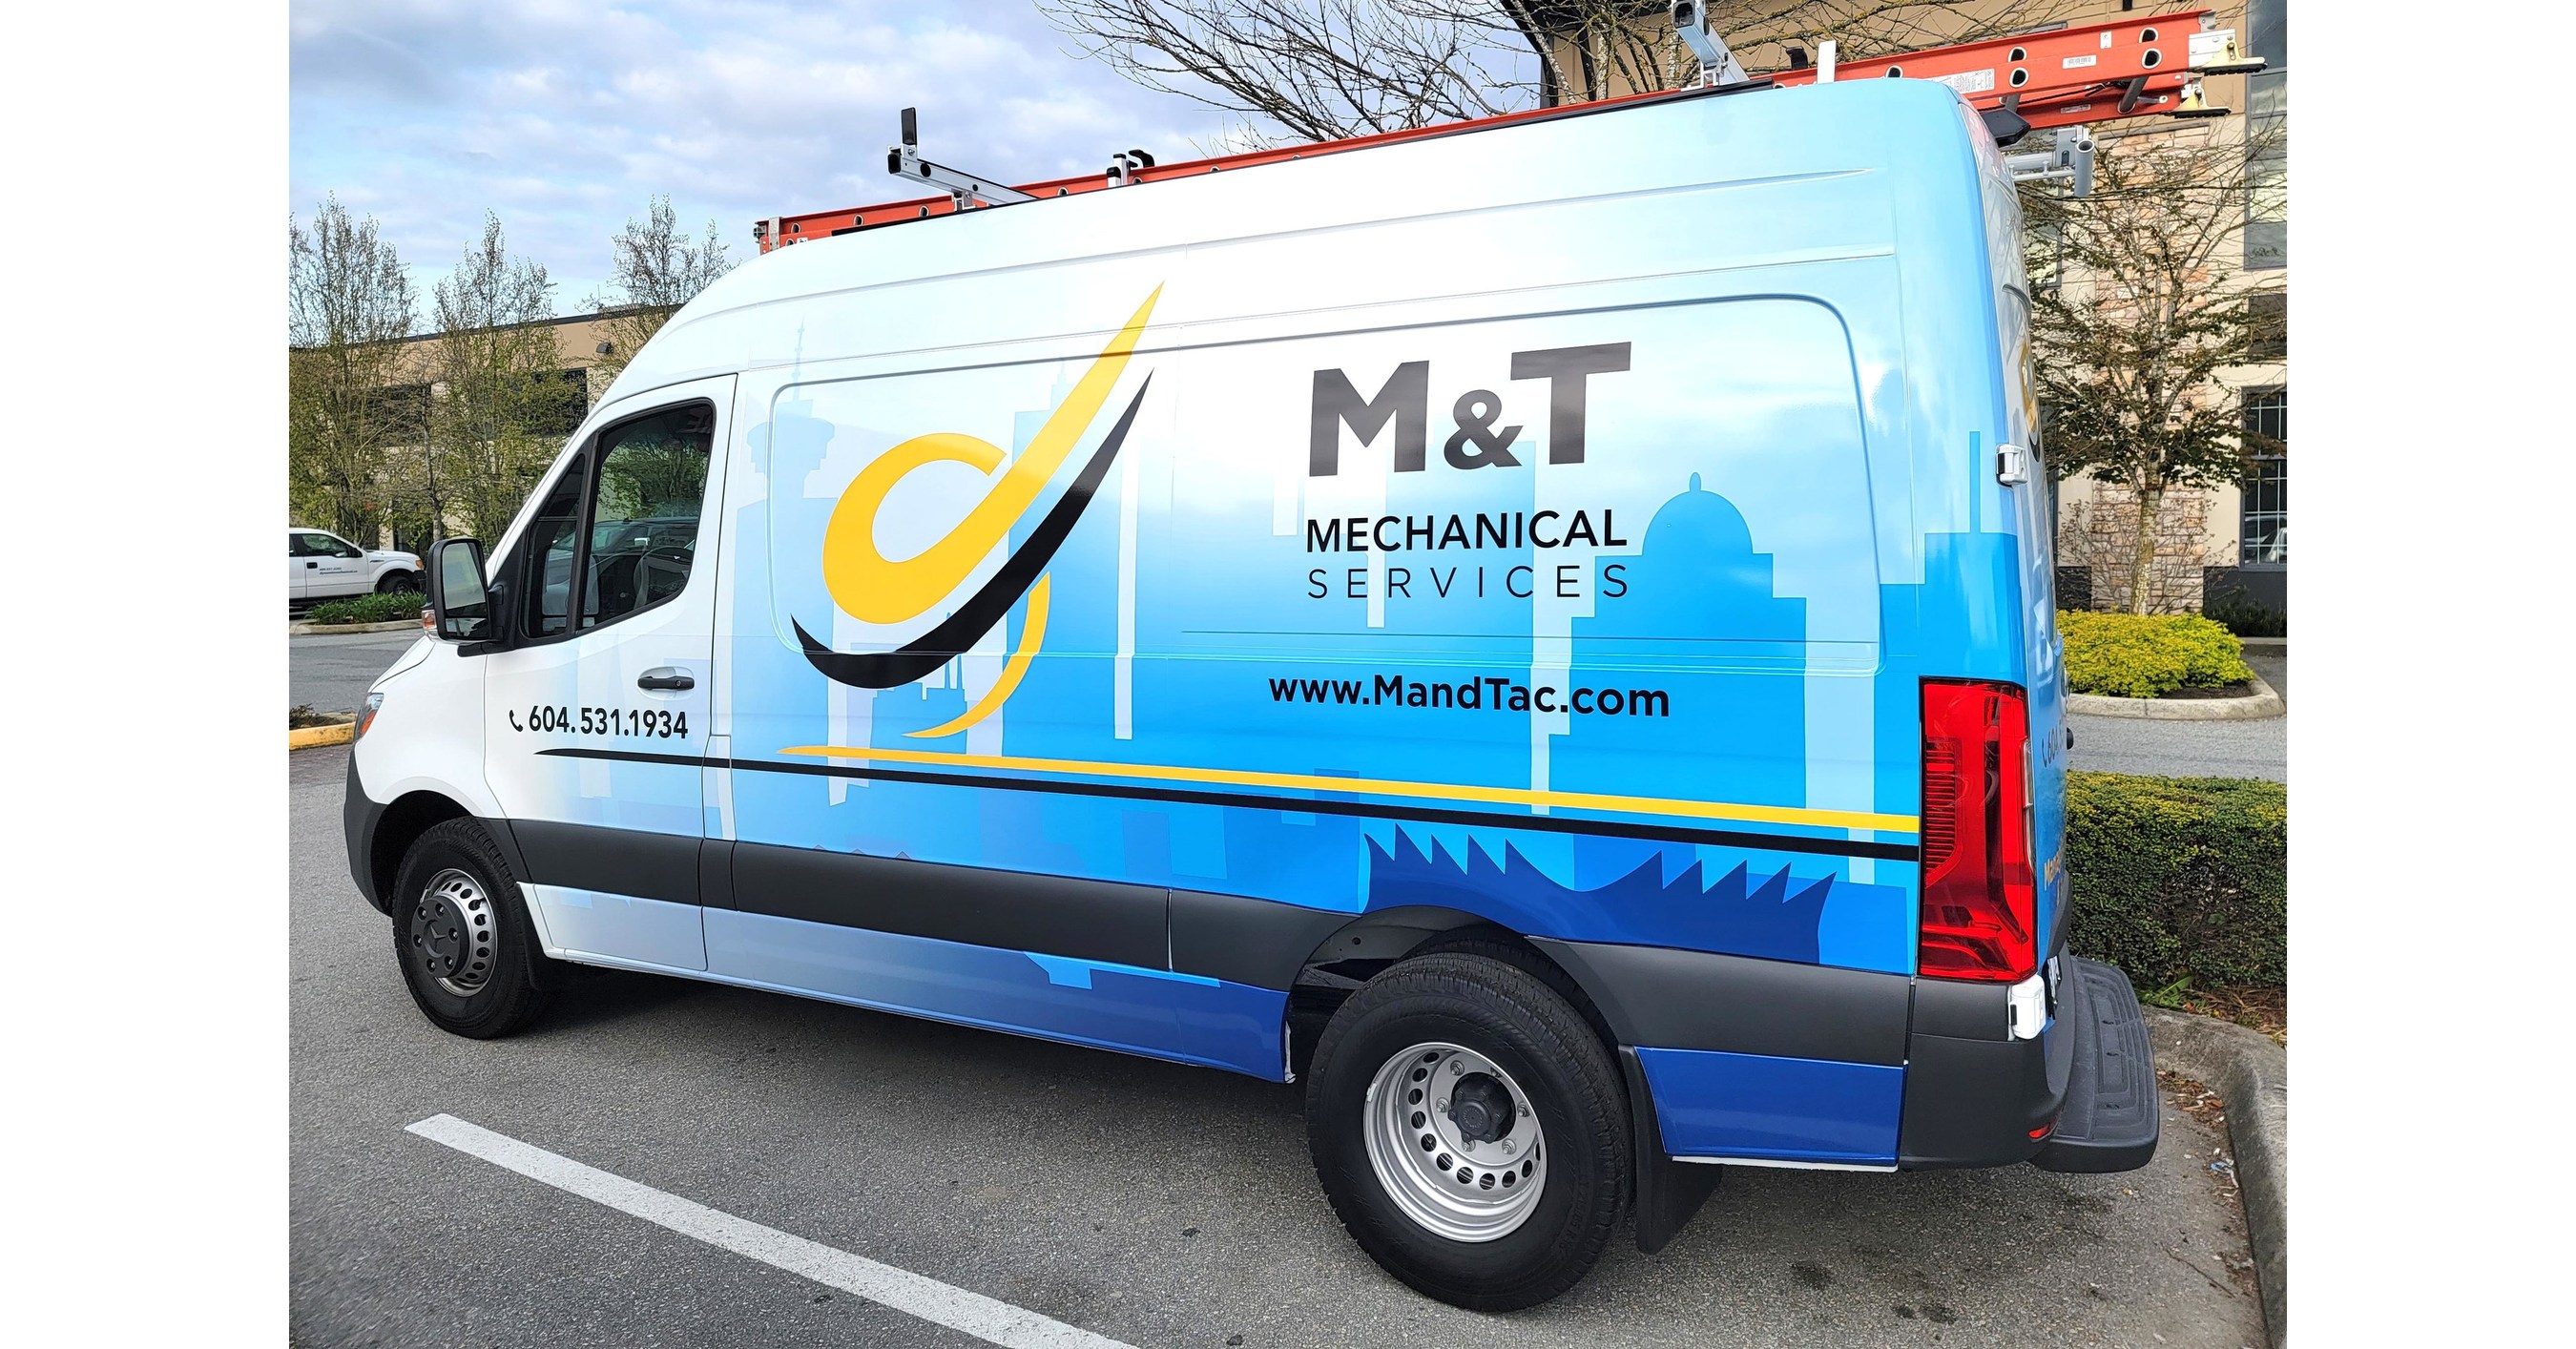 M&T Air Conditioning announces rebranding and launch of a new website